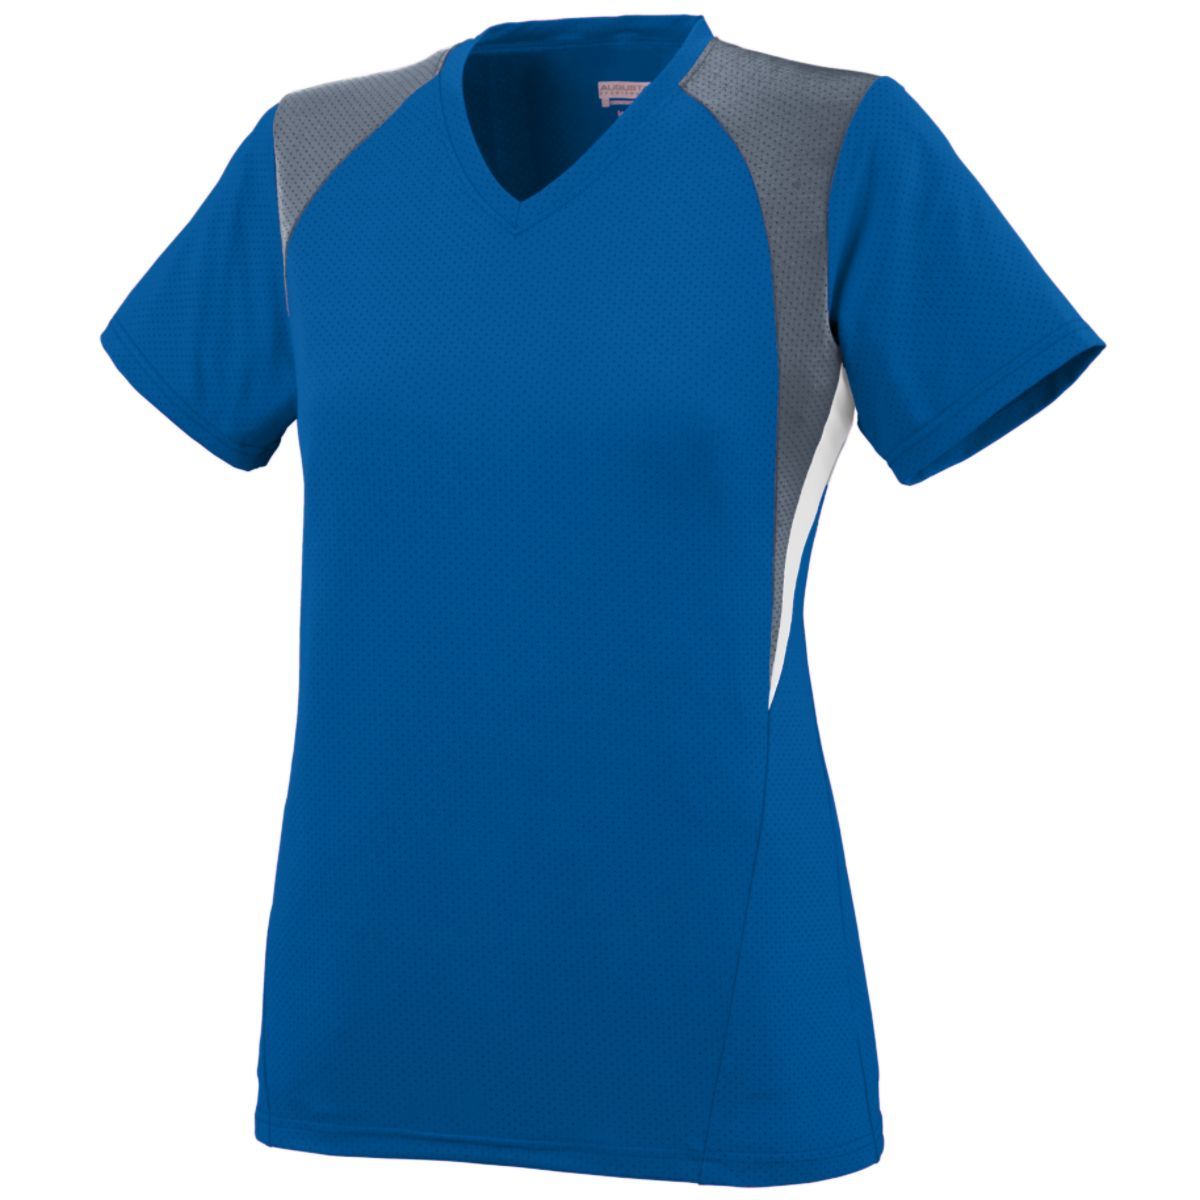 Augusta Sportswear Girls Mystic Jersey in Royal/Graphite/White  -Part of the Girls, Augusta-Products, Soccer, Girls-Jersey, Shirts, All-Sports-1 product lines at KanaleyCreations.com